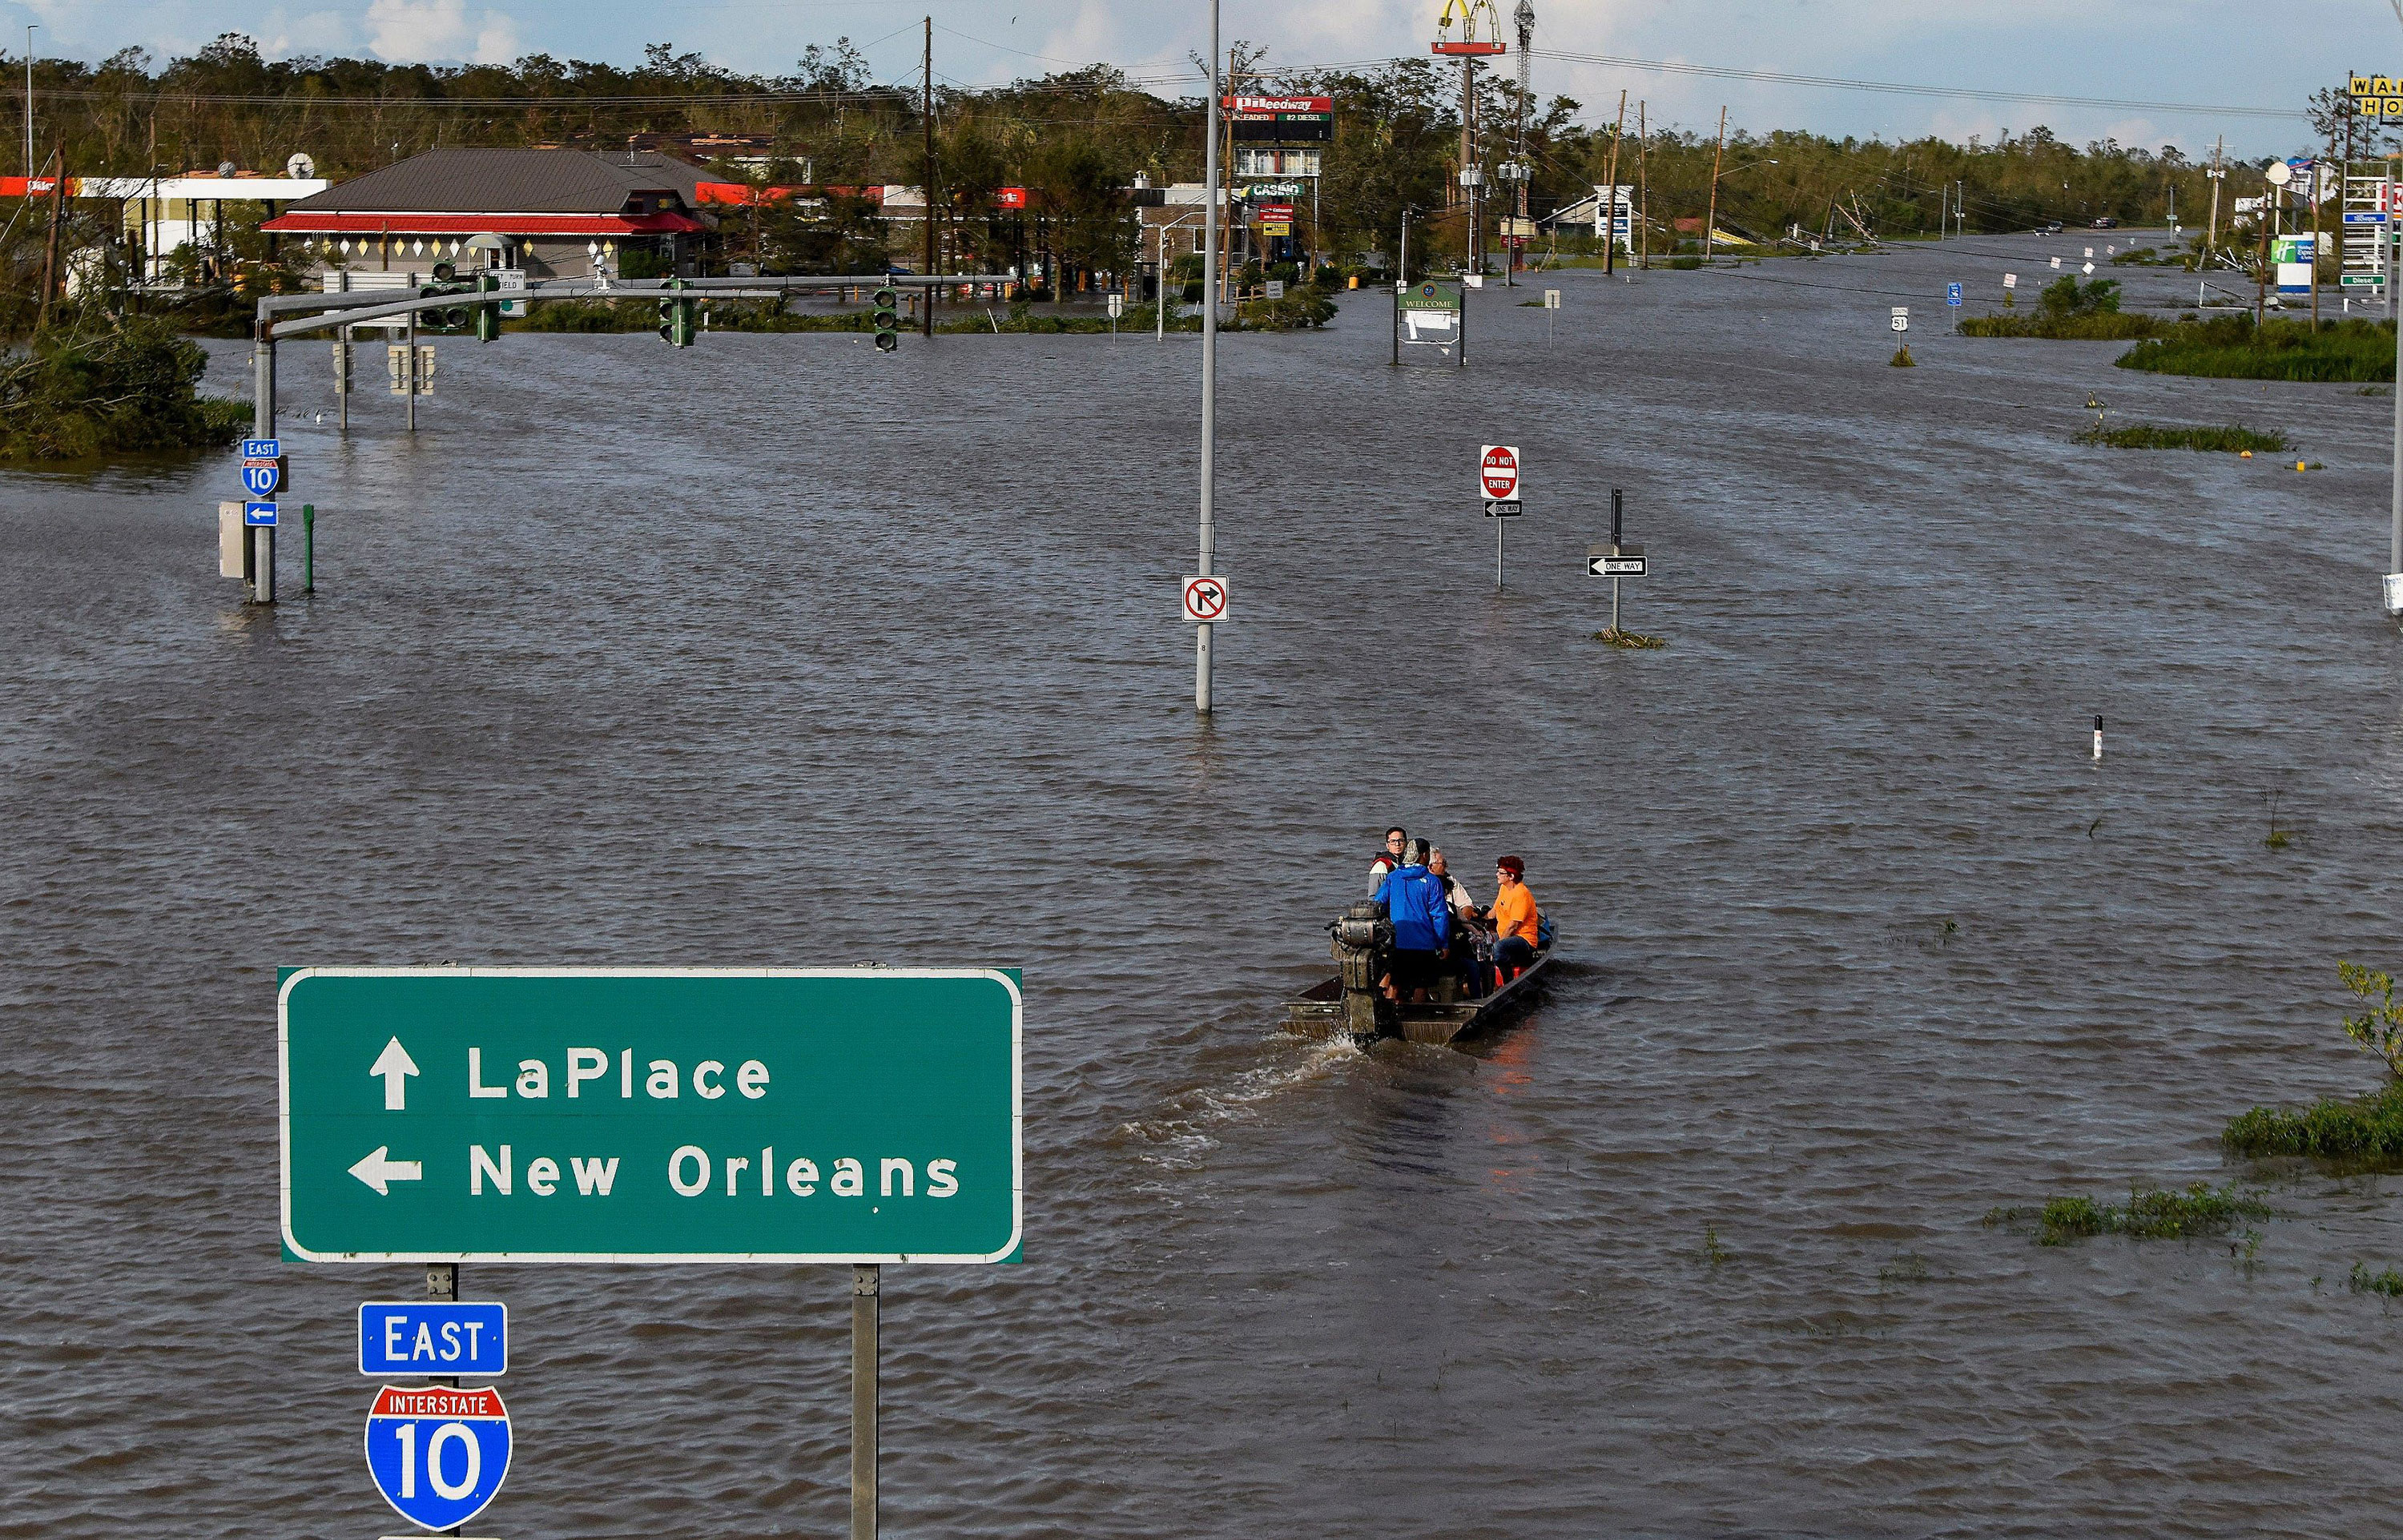 Highway 51 is flooded after Hurricane Ida struck LaPlace, Louisiana.